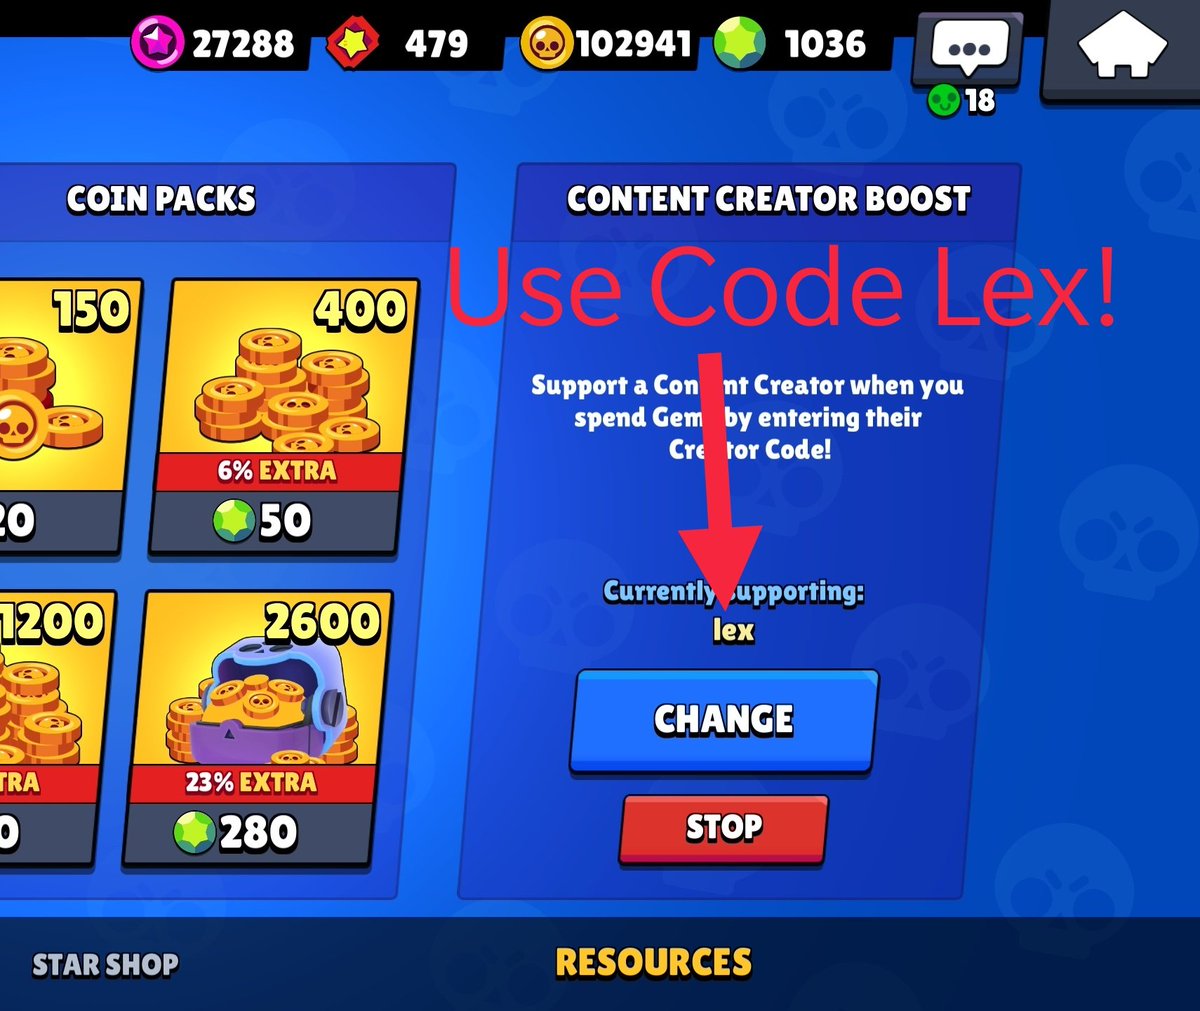 Lex Twitterissa Use Code Lex Creator Codes Back In Brawlstars Just Scroll To The Right In The Shop Enter Lex And You Re Garunteed Free Legendary Brawlers So That Last Part Isn T True - brawl stars promo code 2021